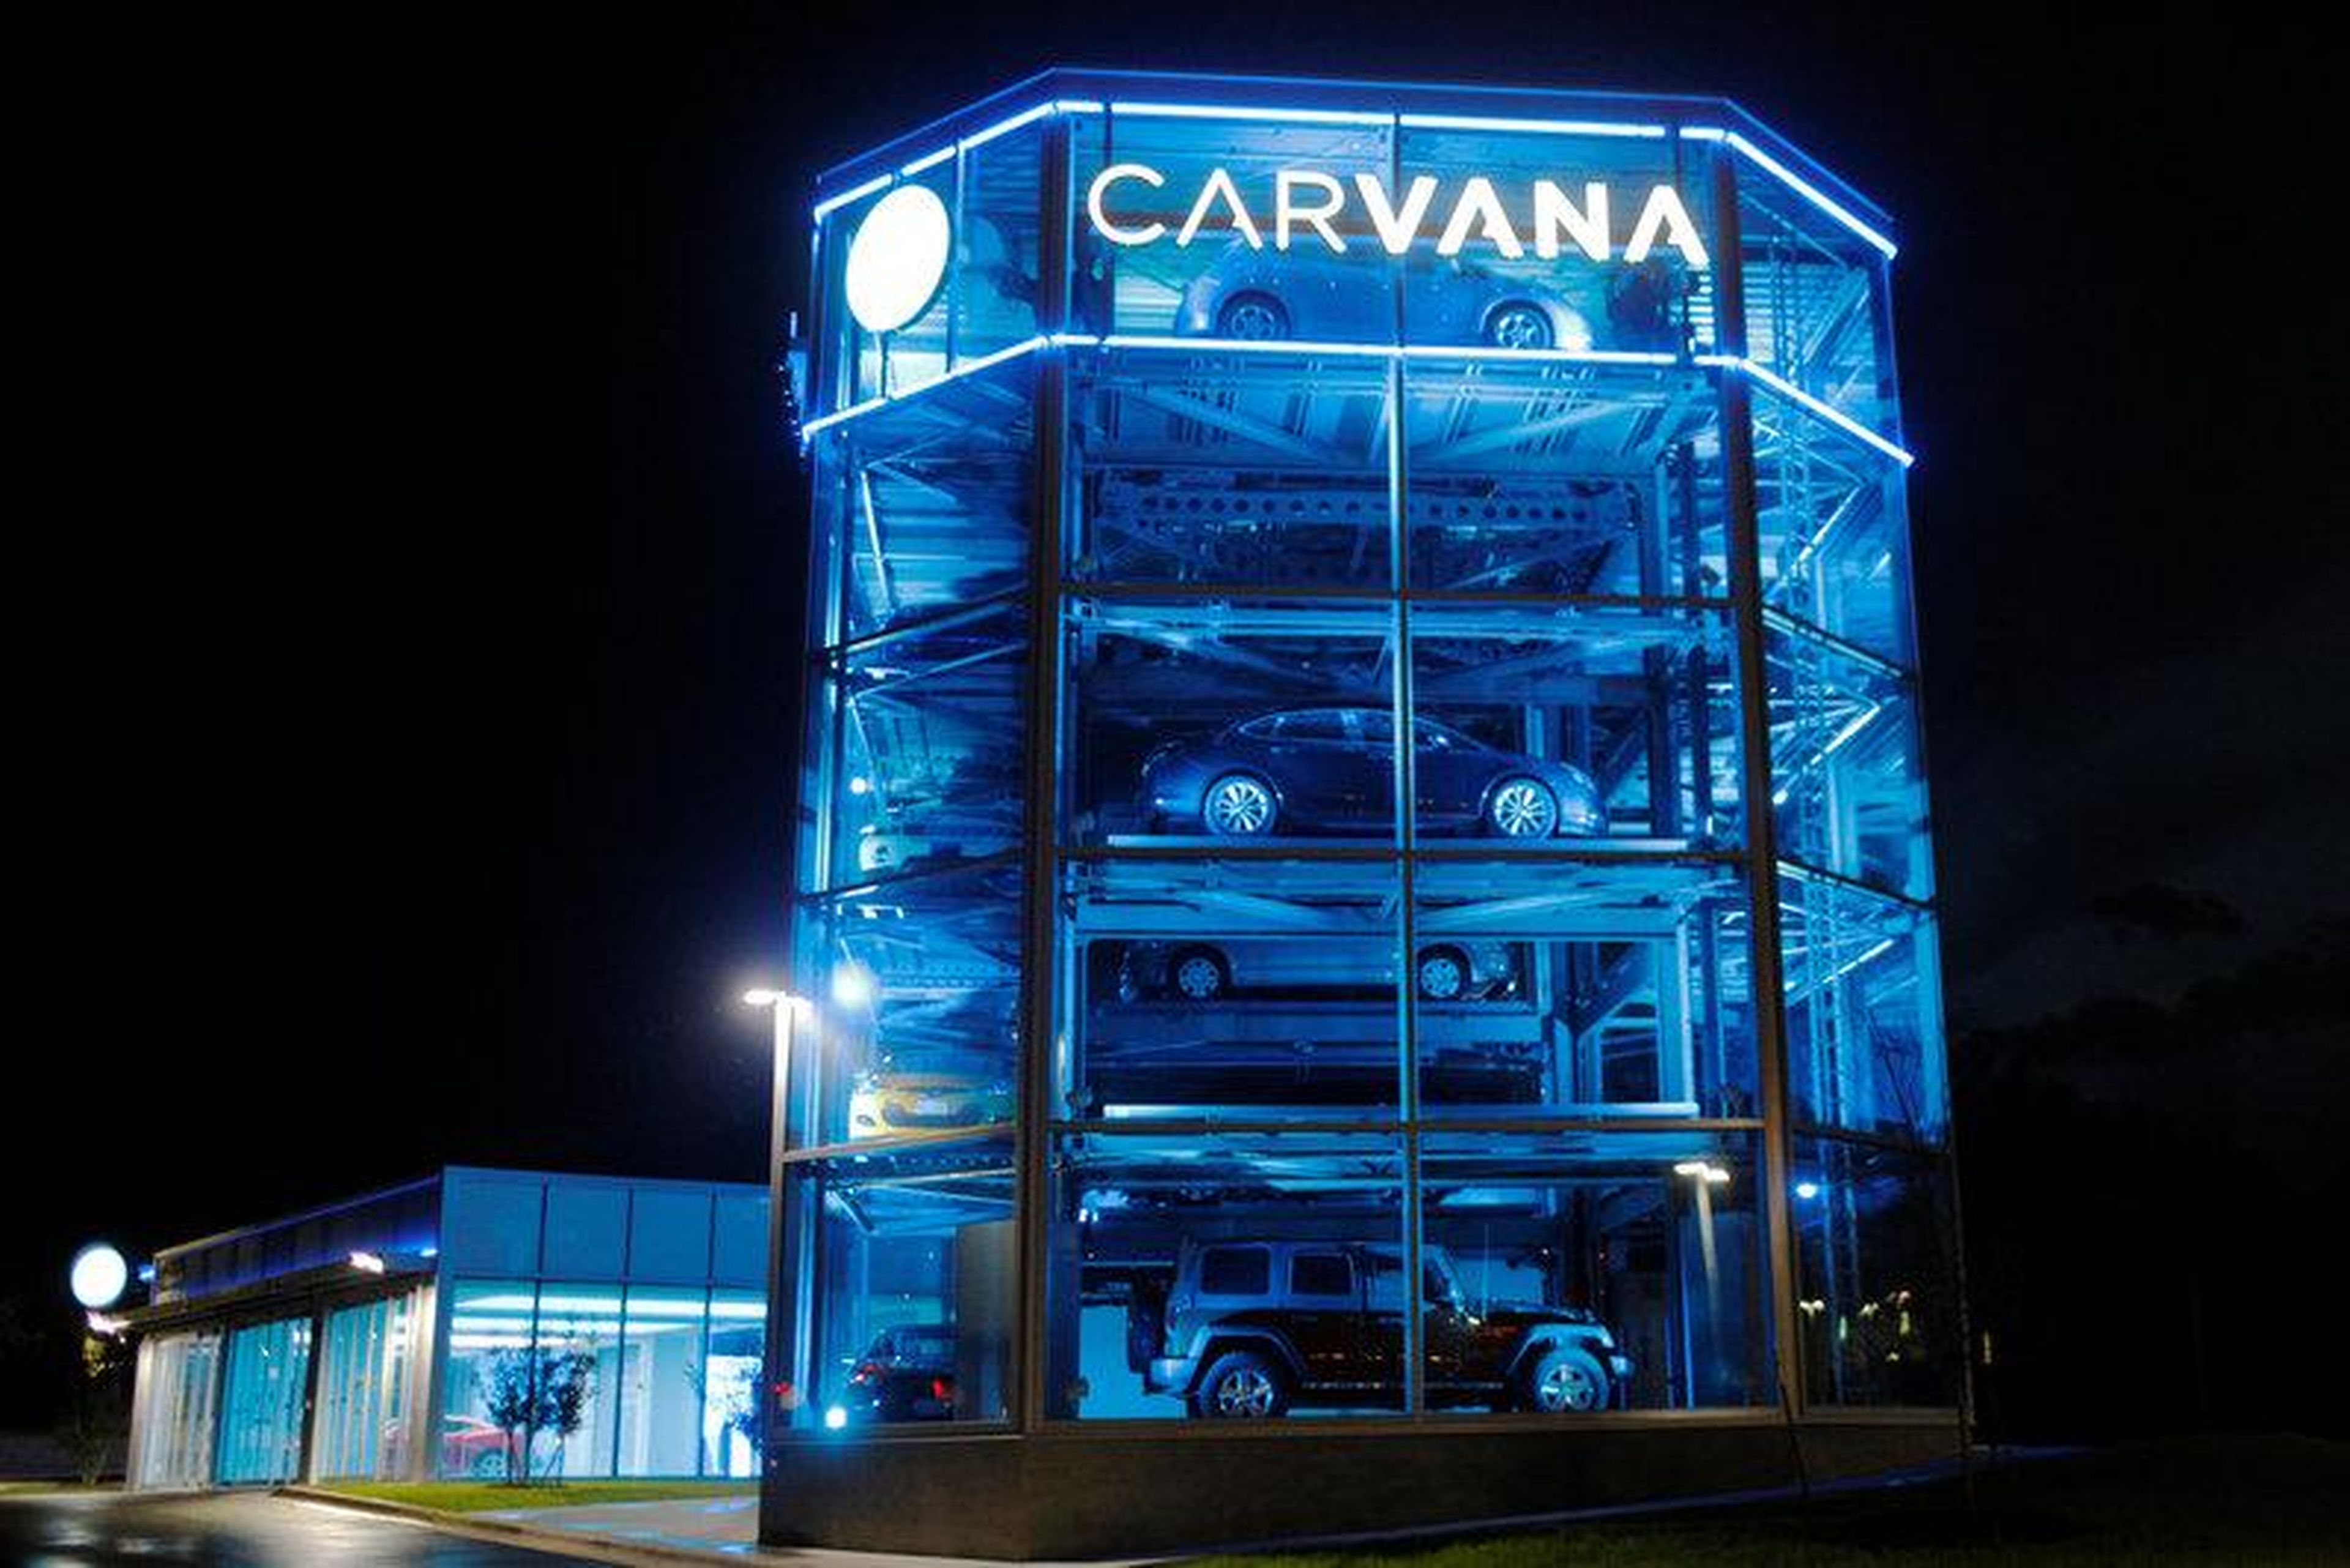 Vehicles at a Carvana dealership in Austin.